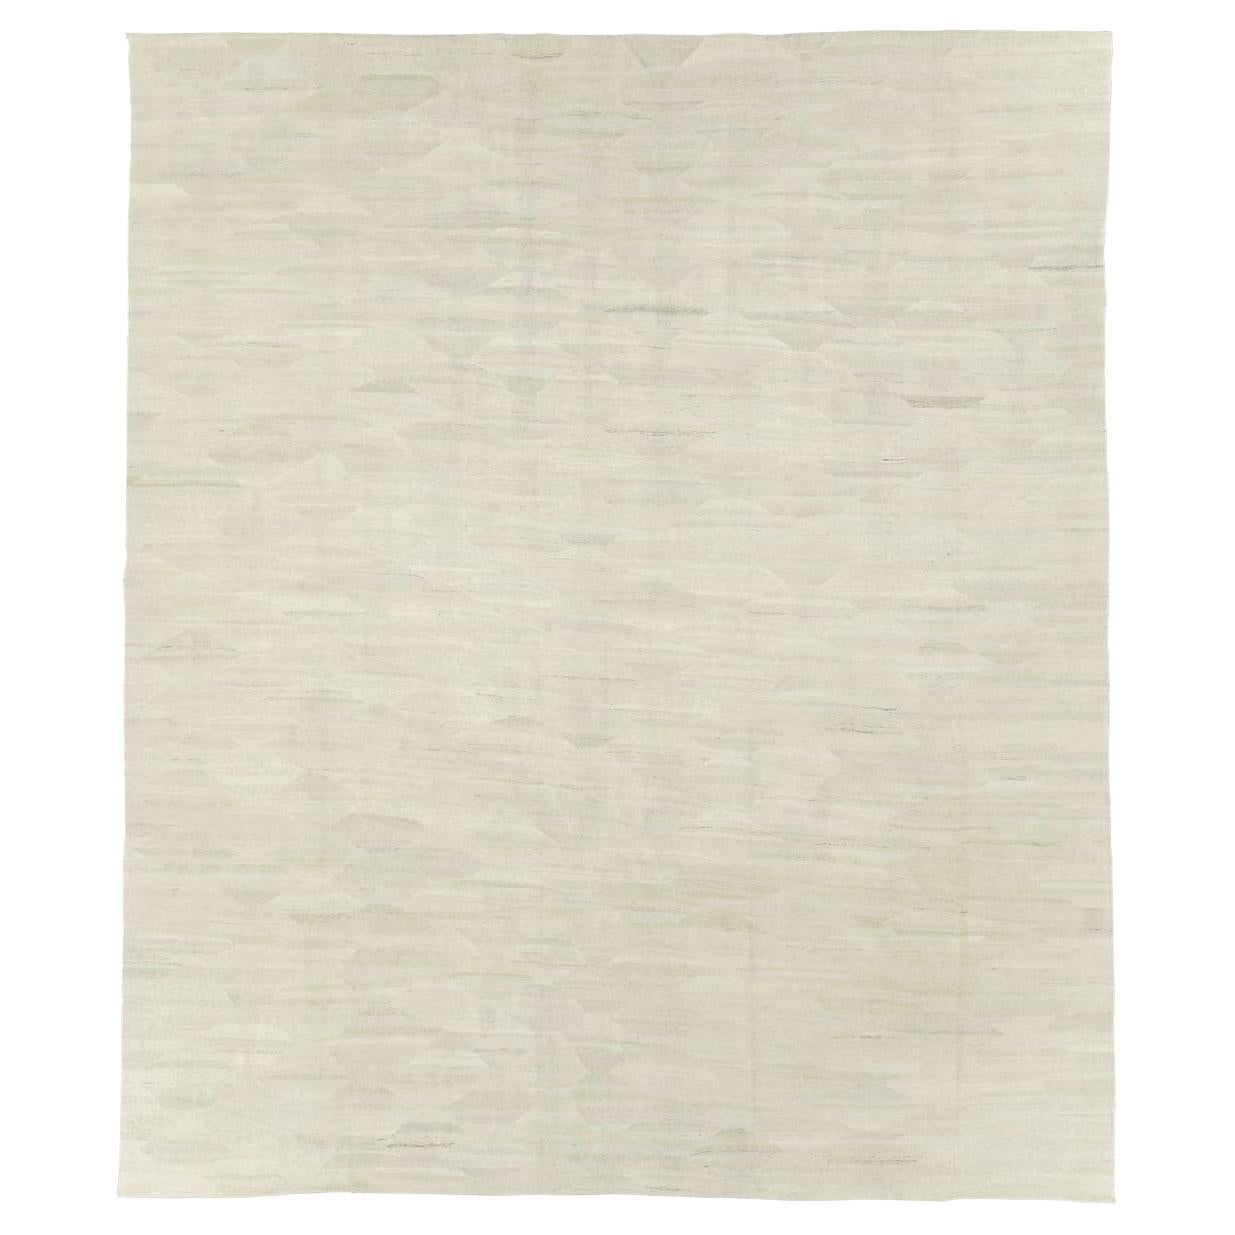 Contemporary Turkish Flatweave Large Carpet in Beige White